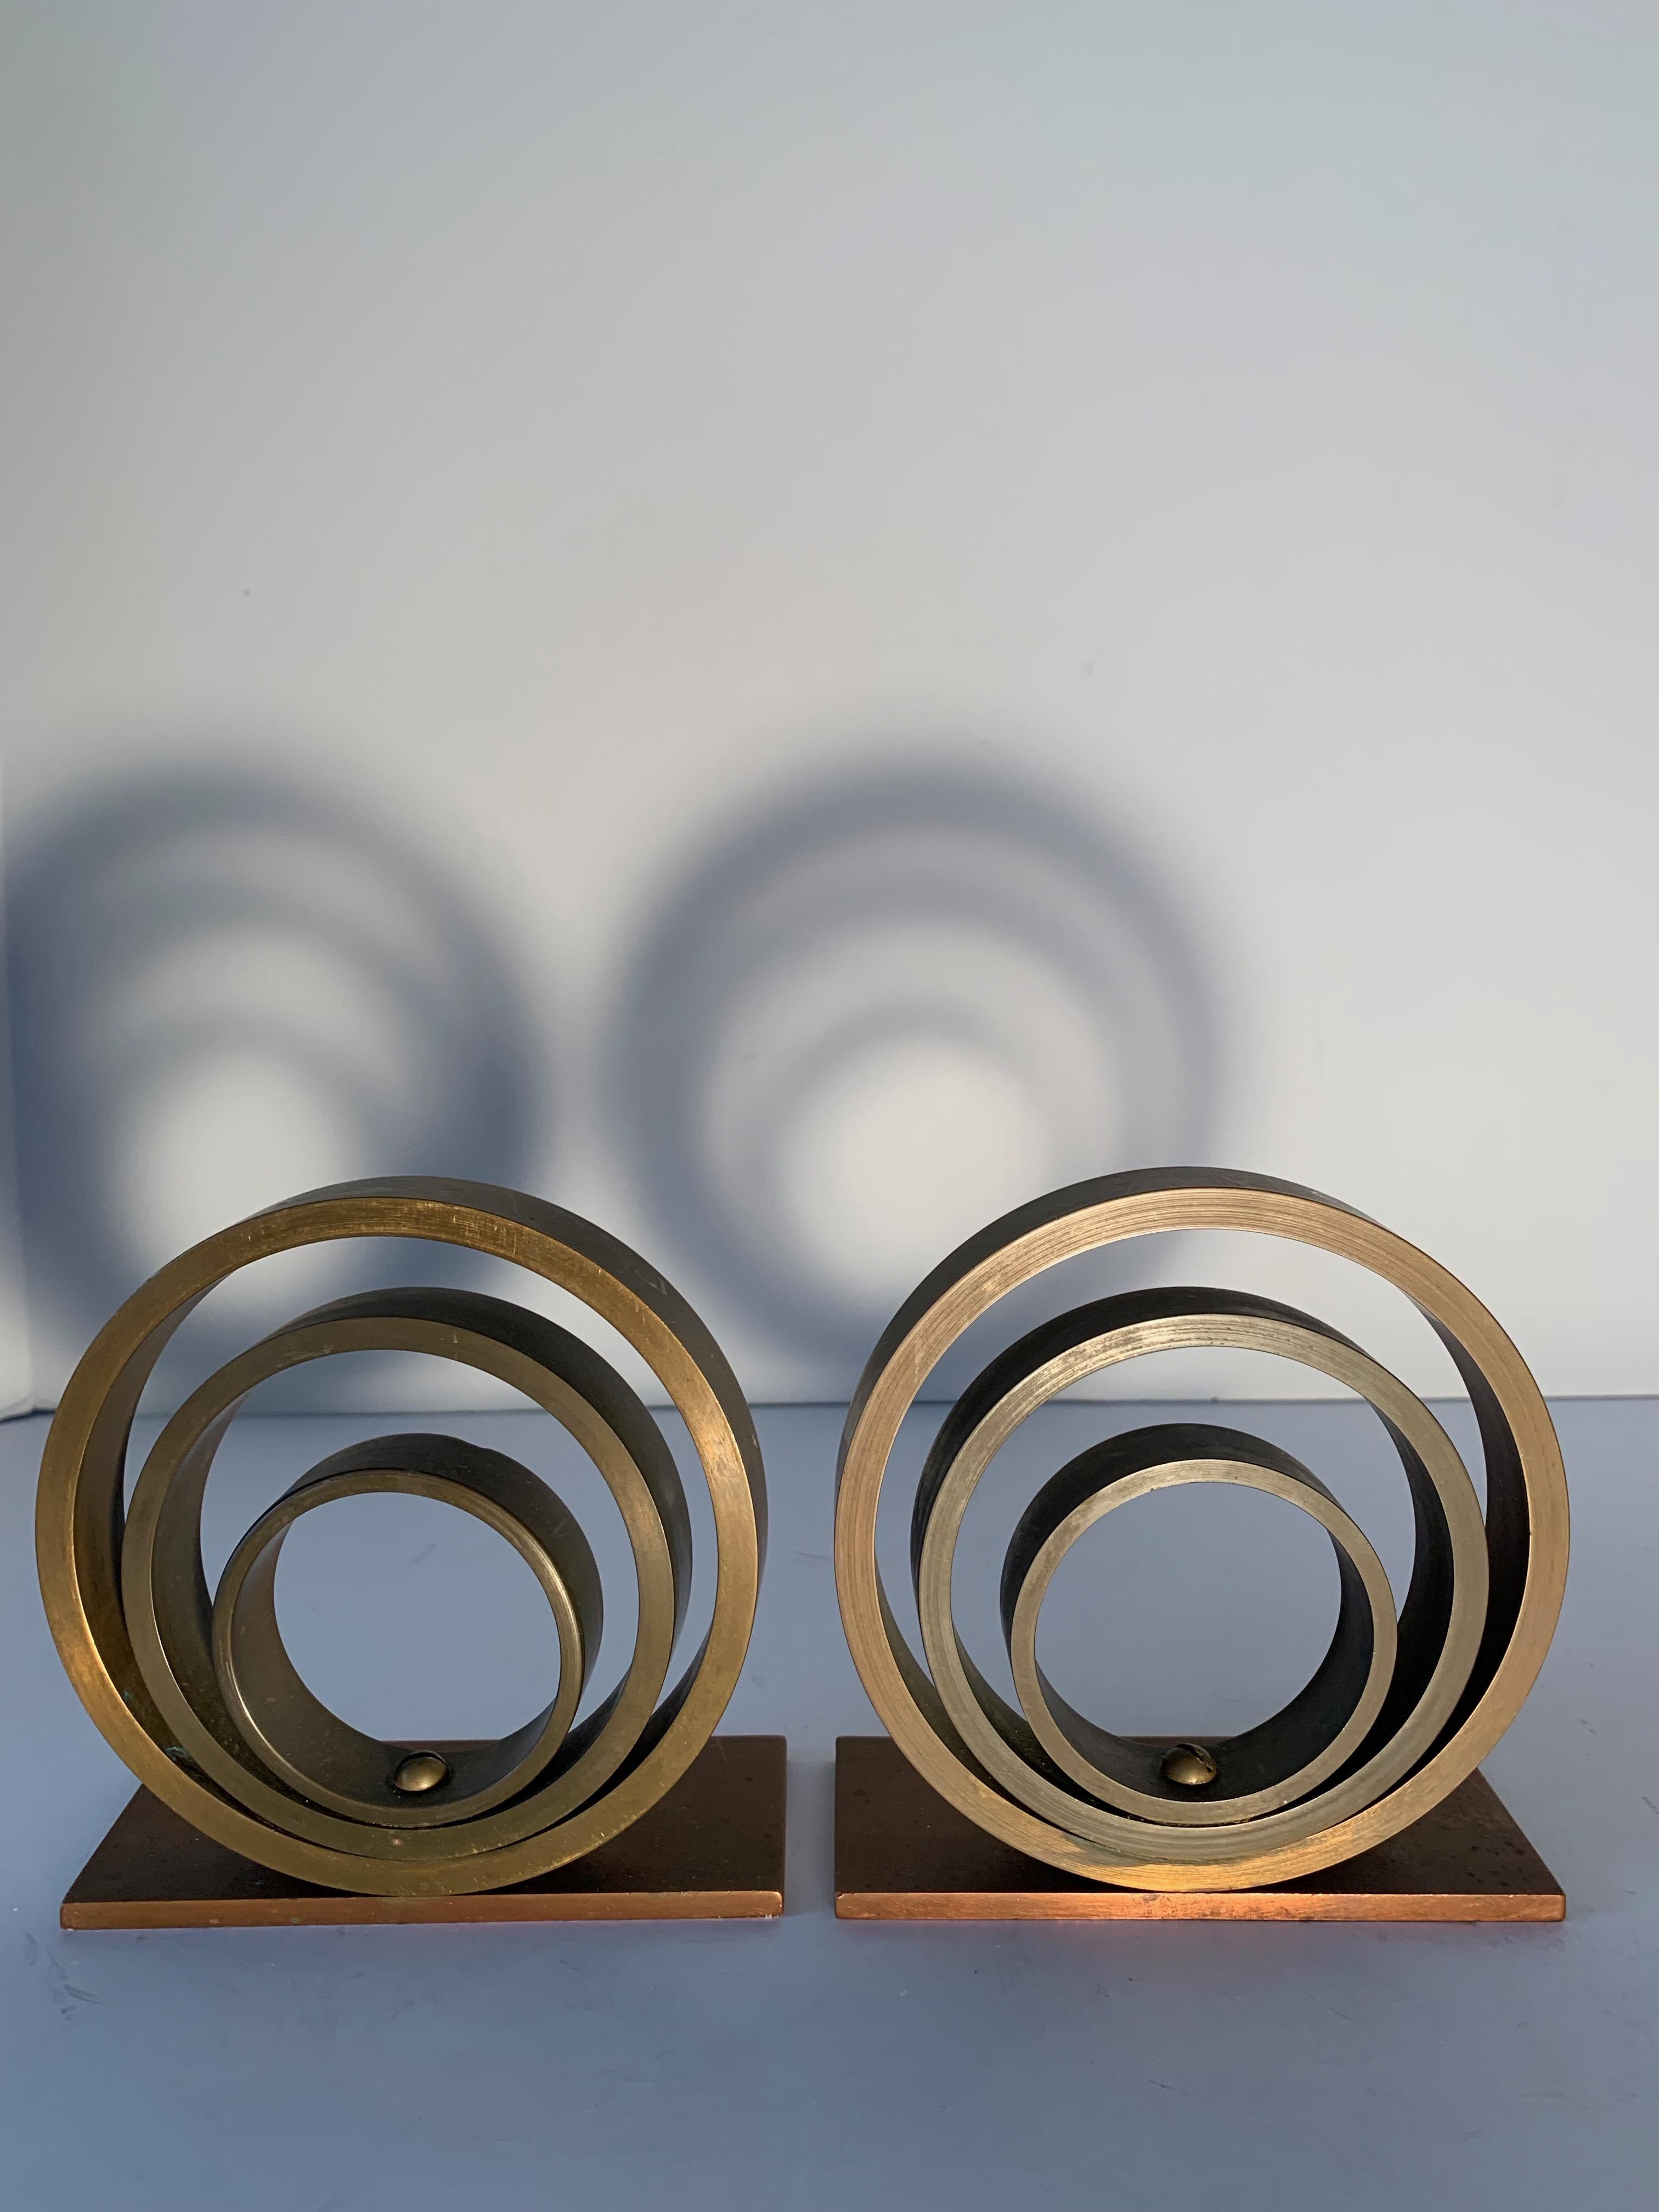 Pair of brass and copper ring bookends in the manner of Walter Von Nessen.
Architectural, Industrial, Art Deco, simplicity defined elegance.

Perfect for any shelf, in any space in your home - statement pieces for the sophisticated.